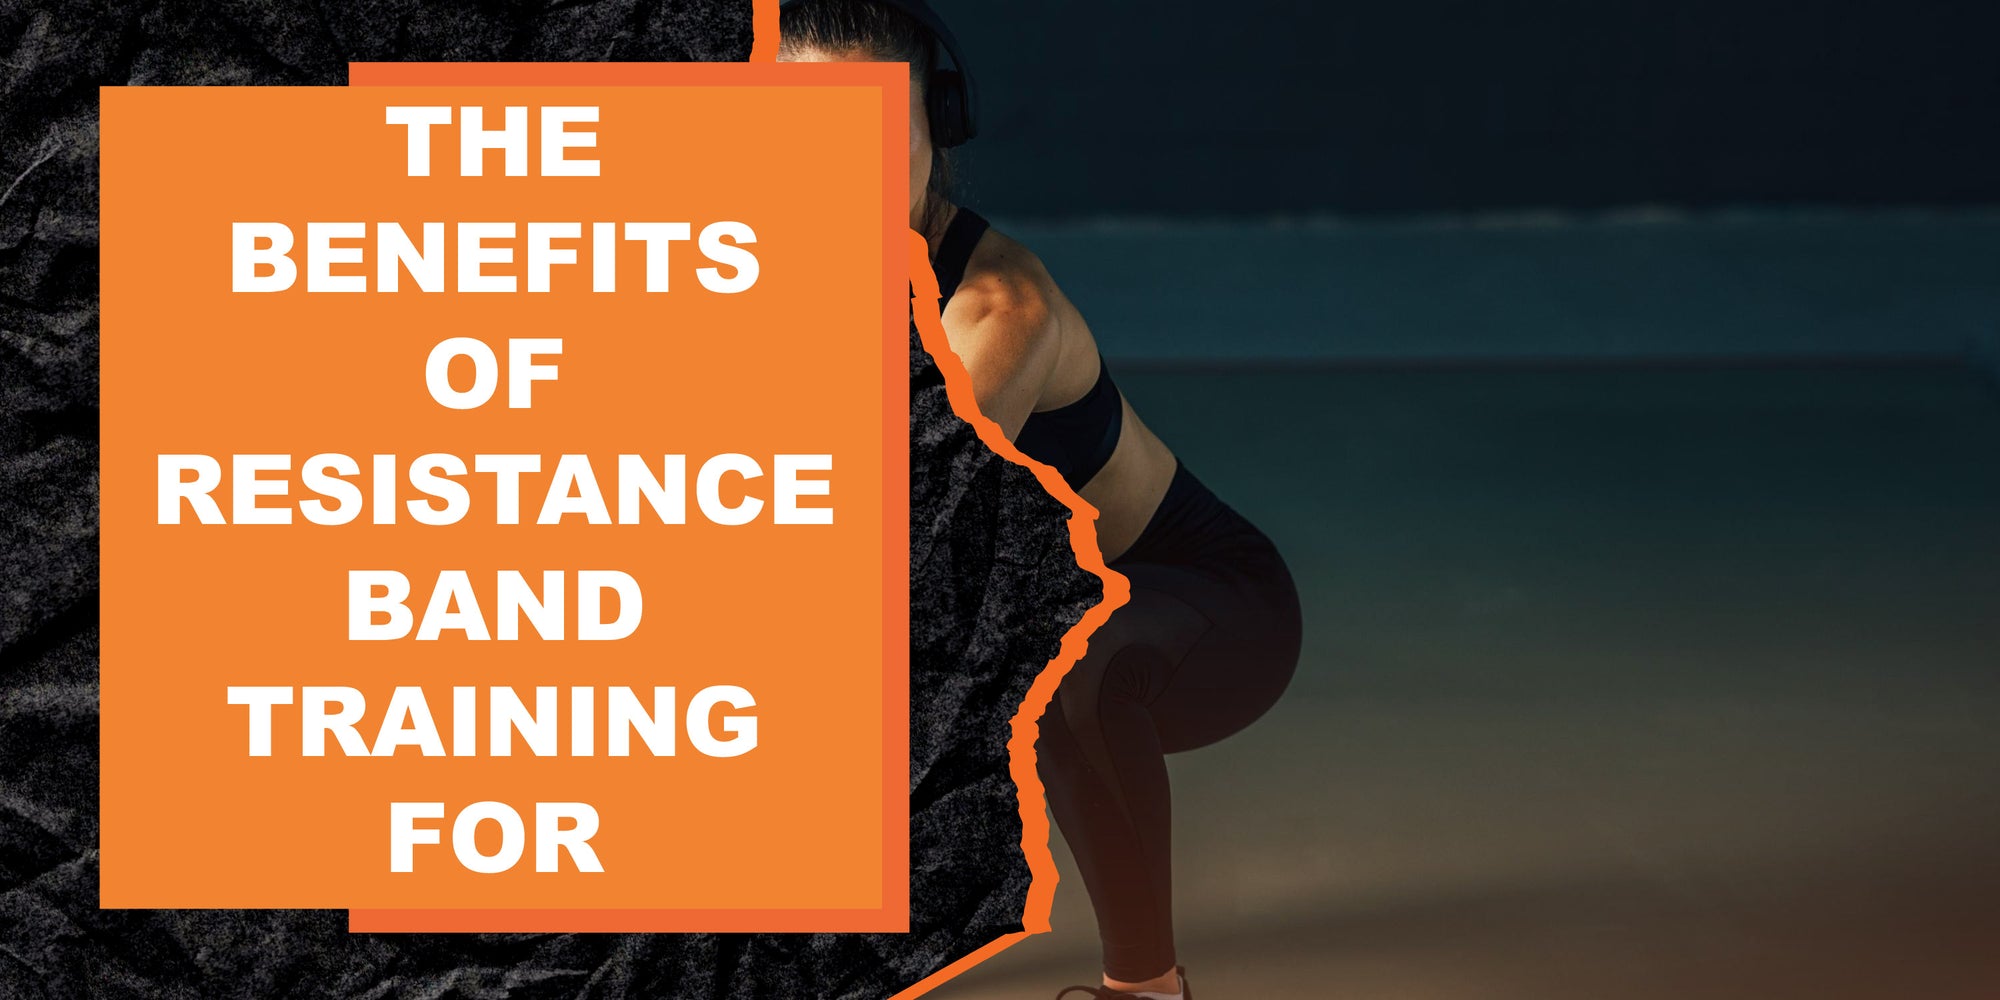 The Benefits of Resistance Band Training for Optimal Performance